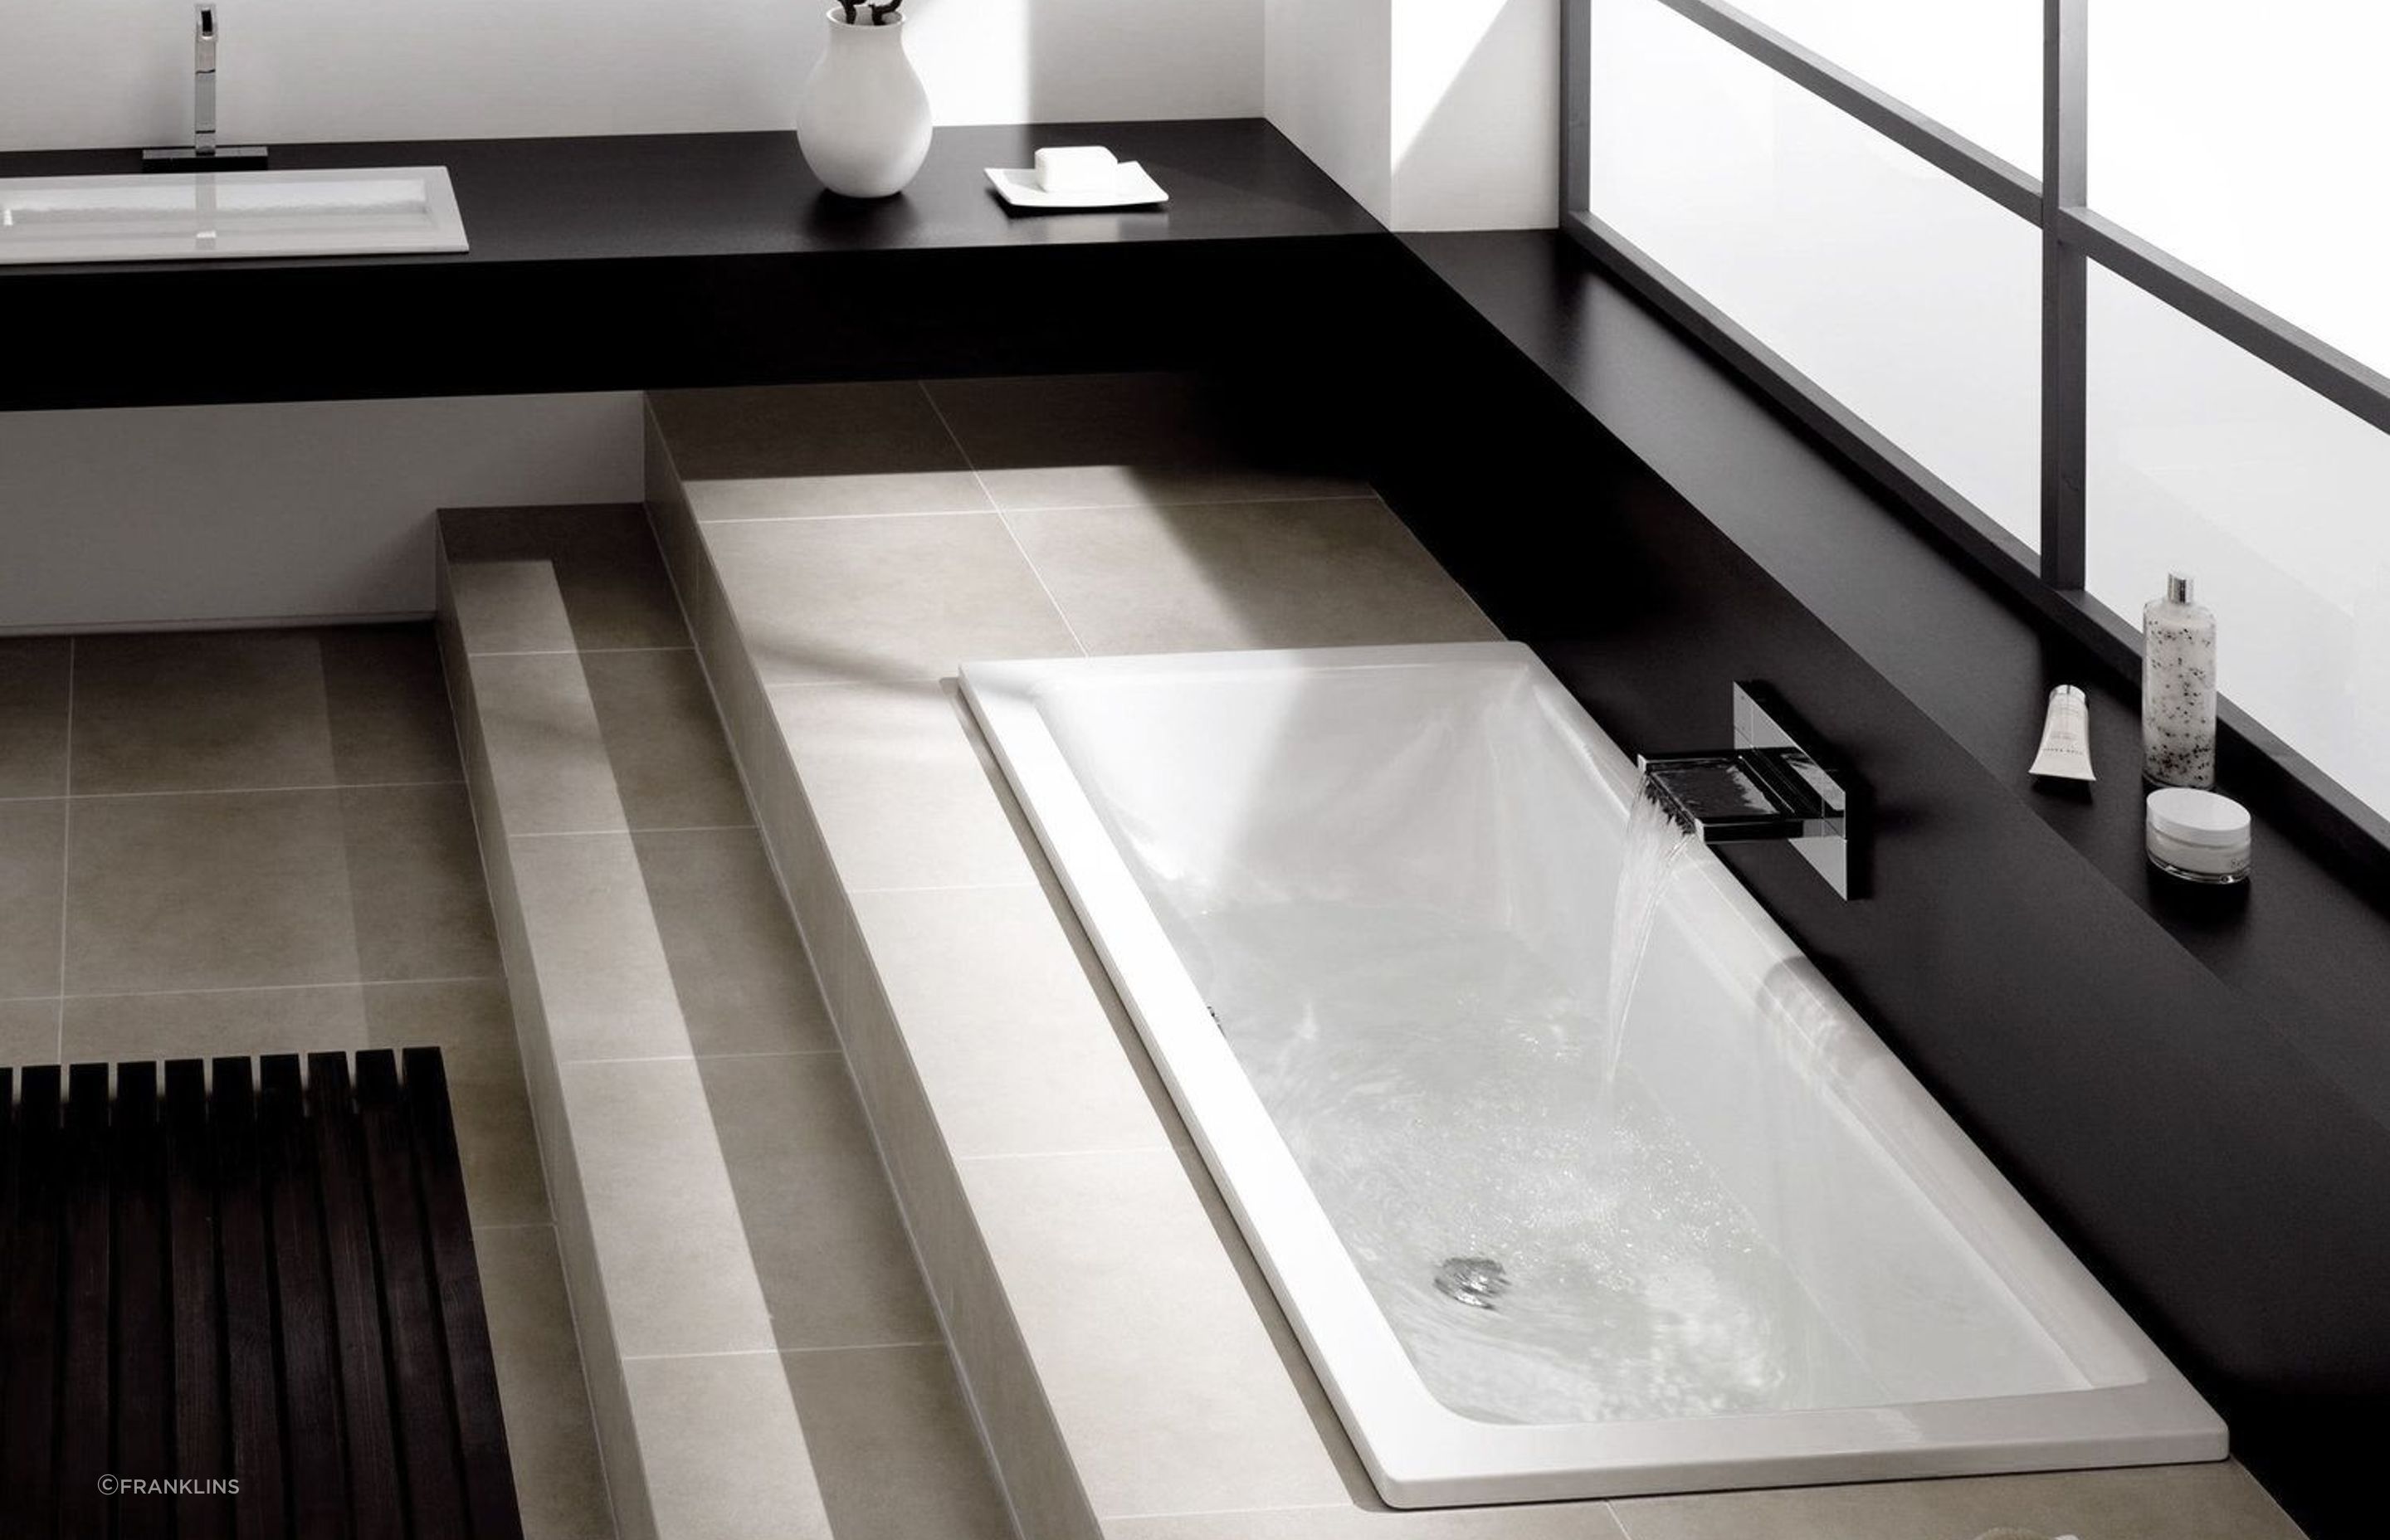 The Bette Free Drop-in Bath provides relaxed bathing for two with its centrally placed drain